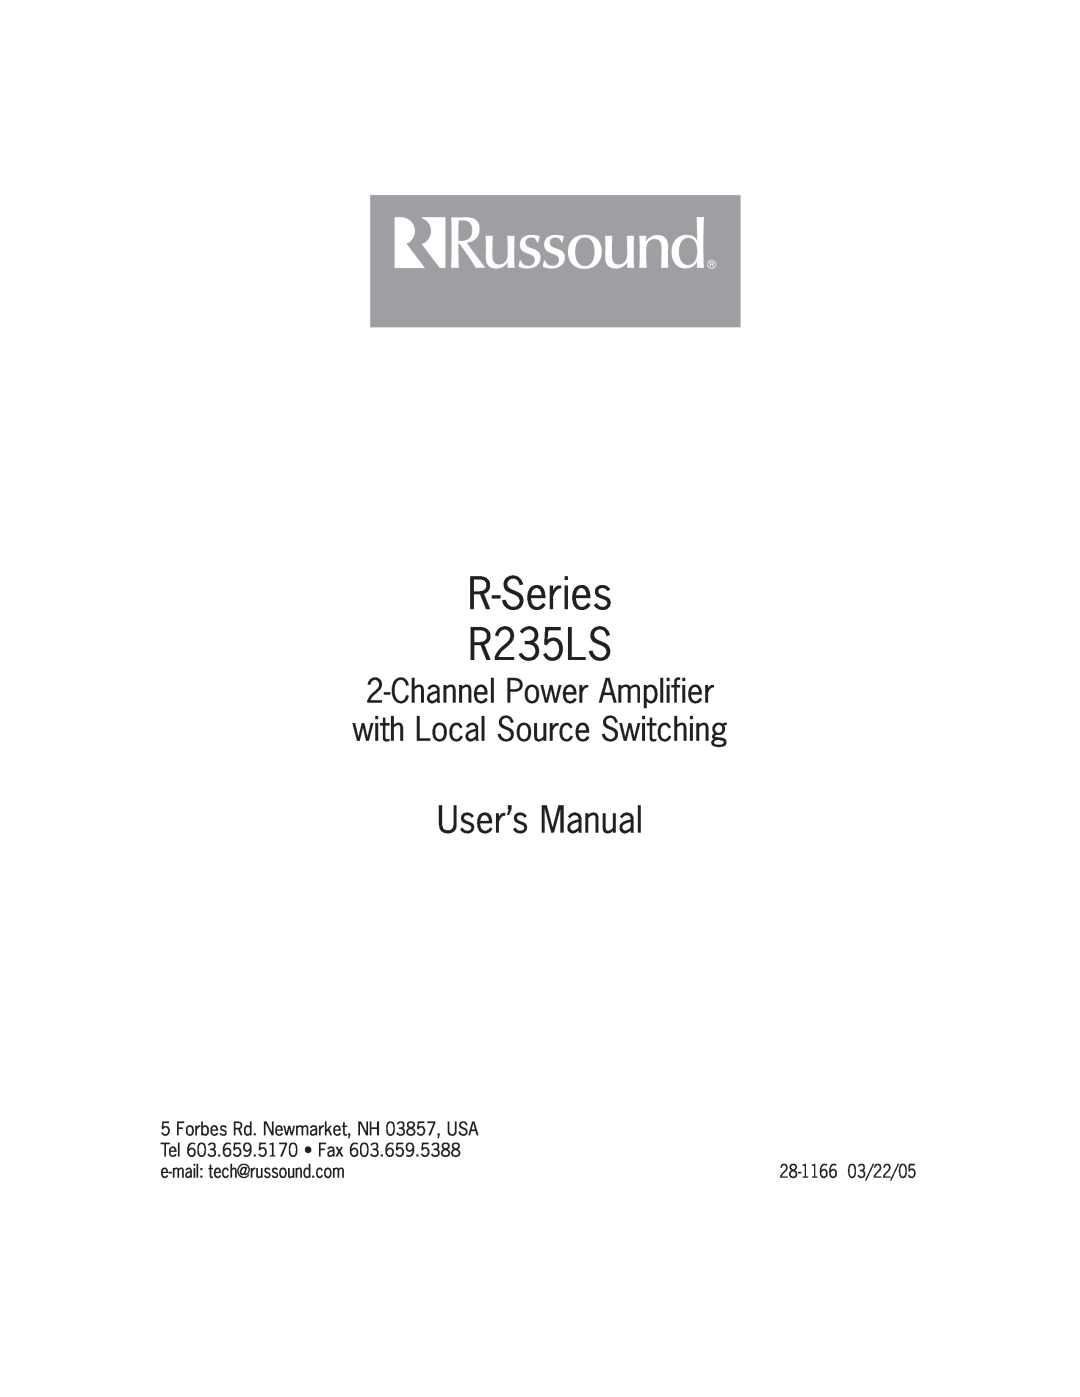 Russound user manual Forbes Rd. Newmarket, NH 03857, USA, Tel 603.659.5170 Fax, 28-116603/22/05, R-Series R235LS 